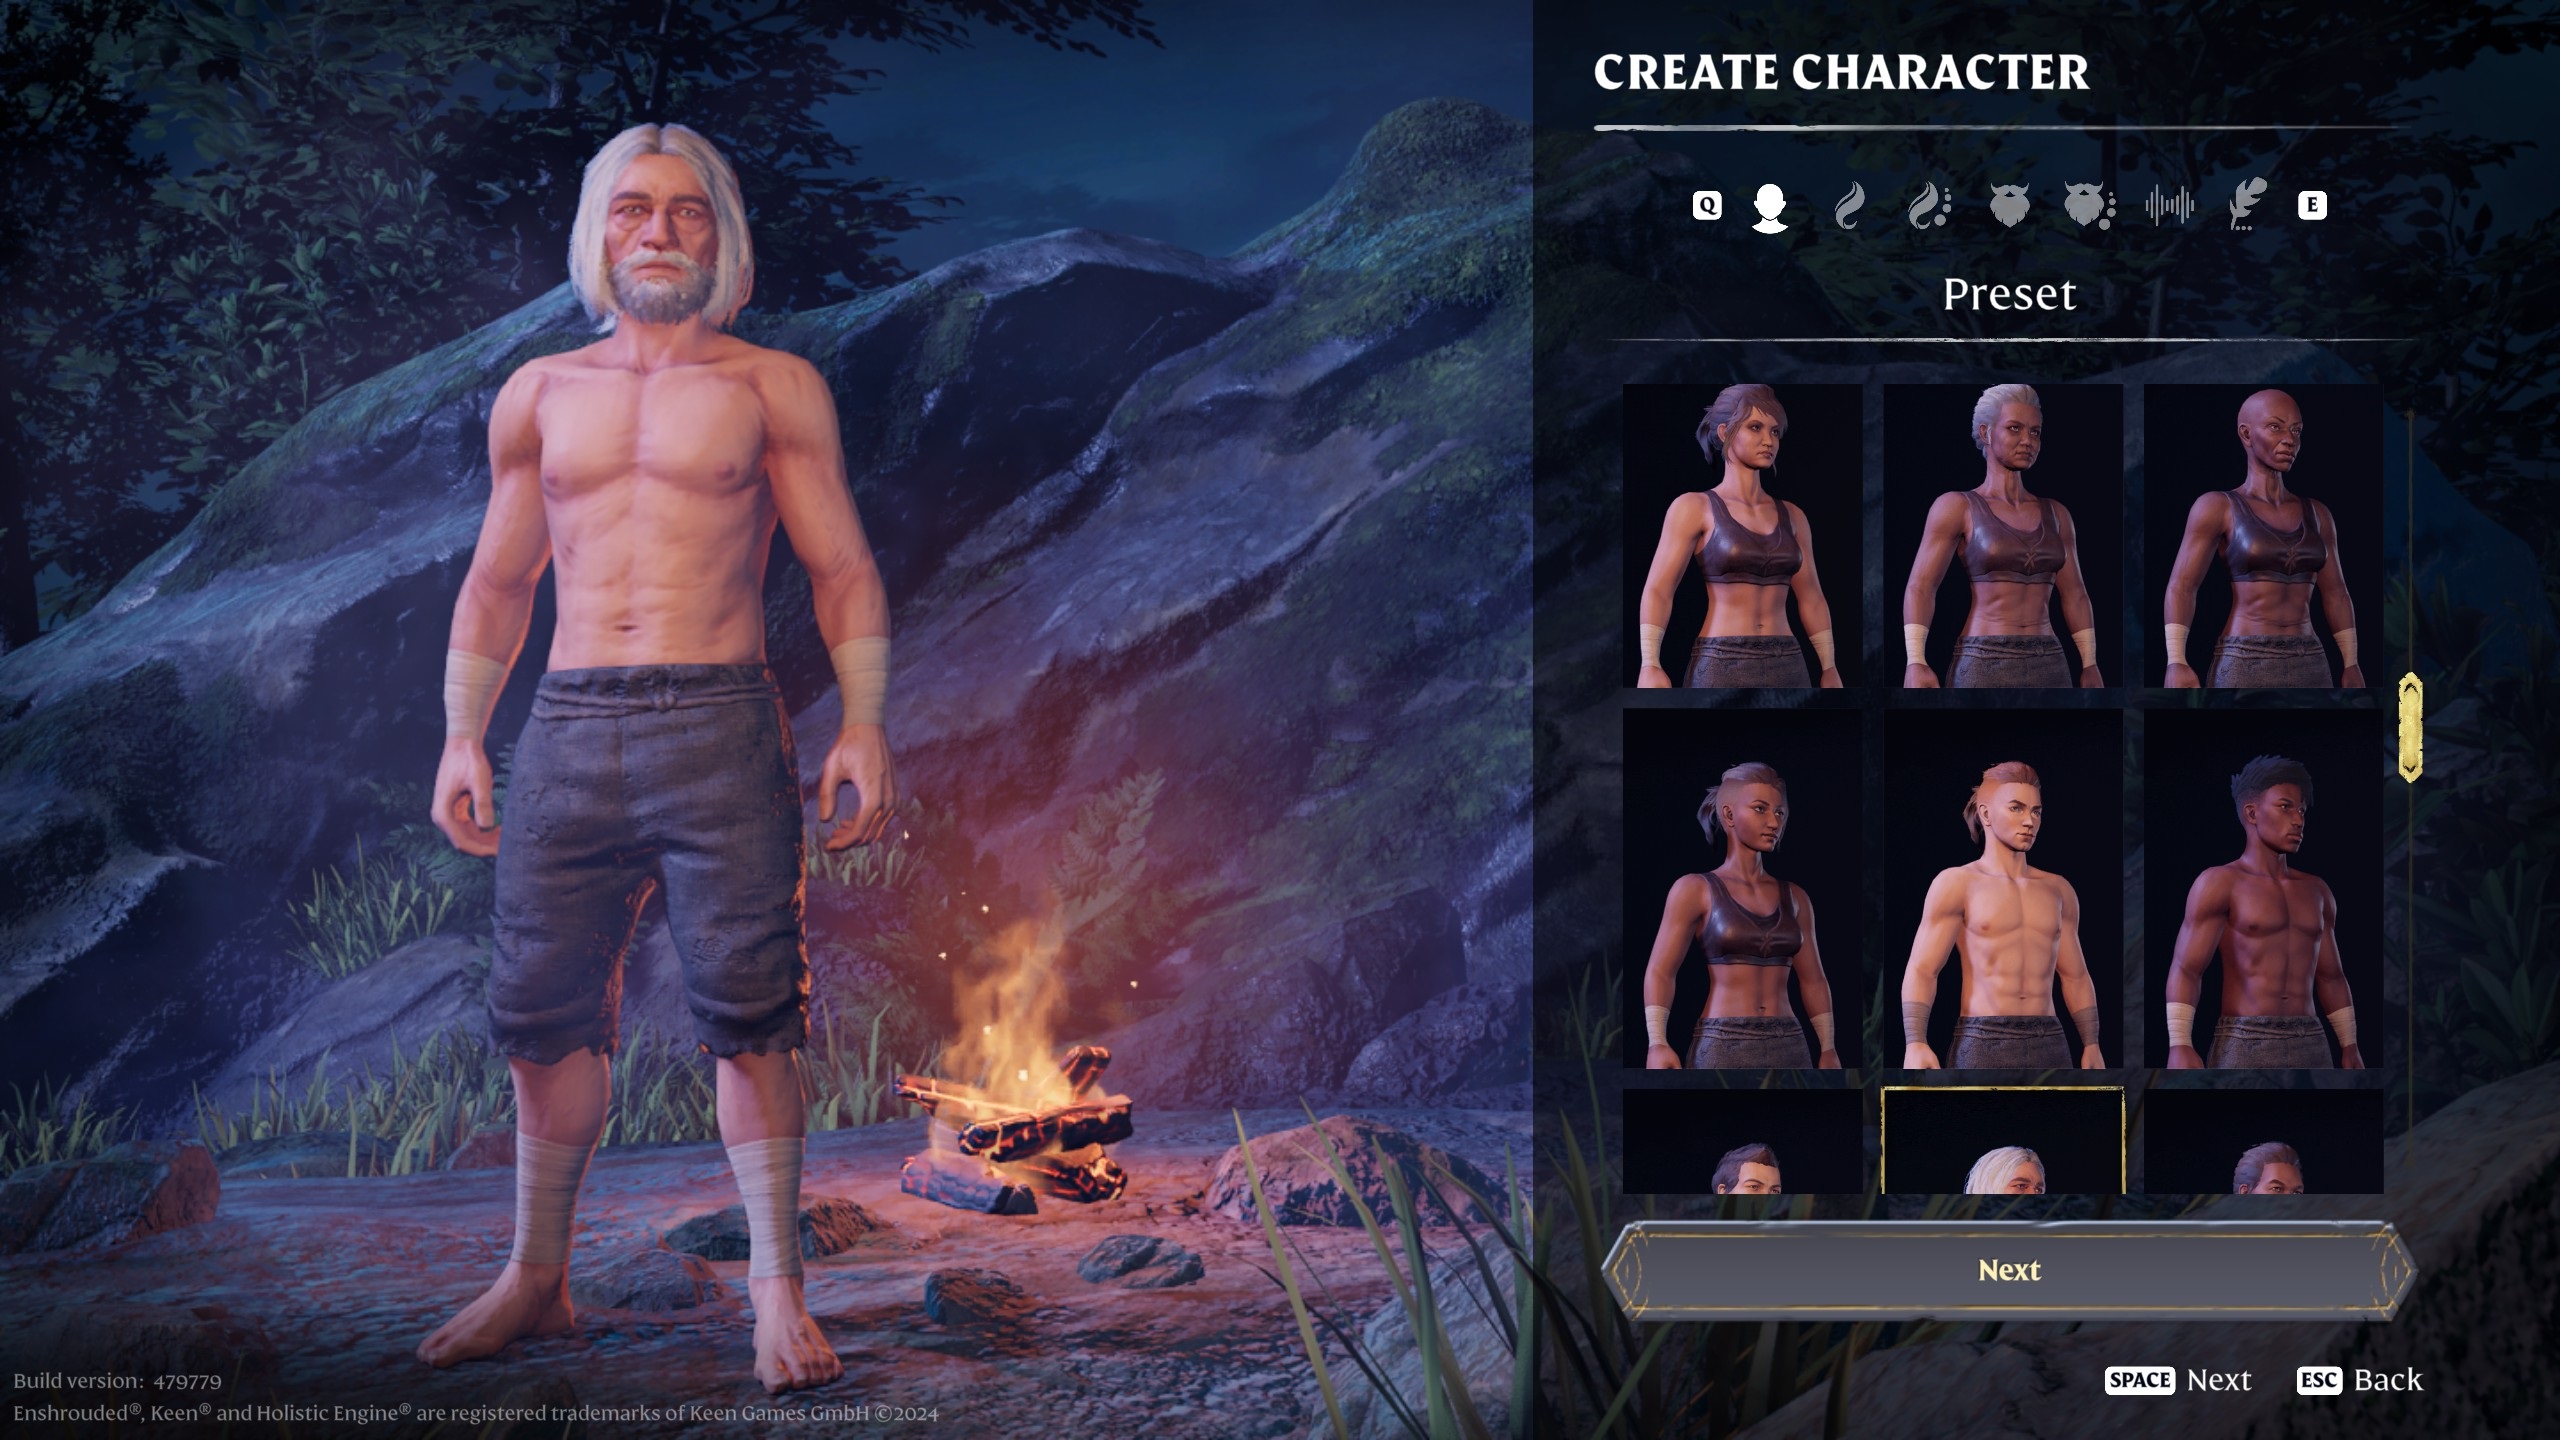 Guide to Crafting the Ideal Avatar in the Enshrouded Character Creation System